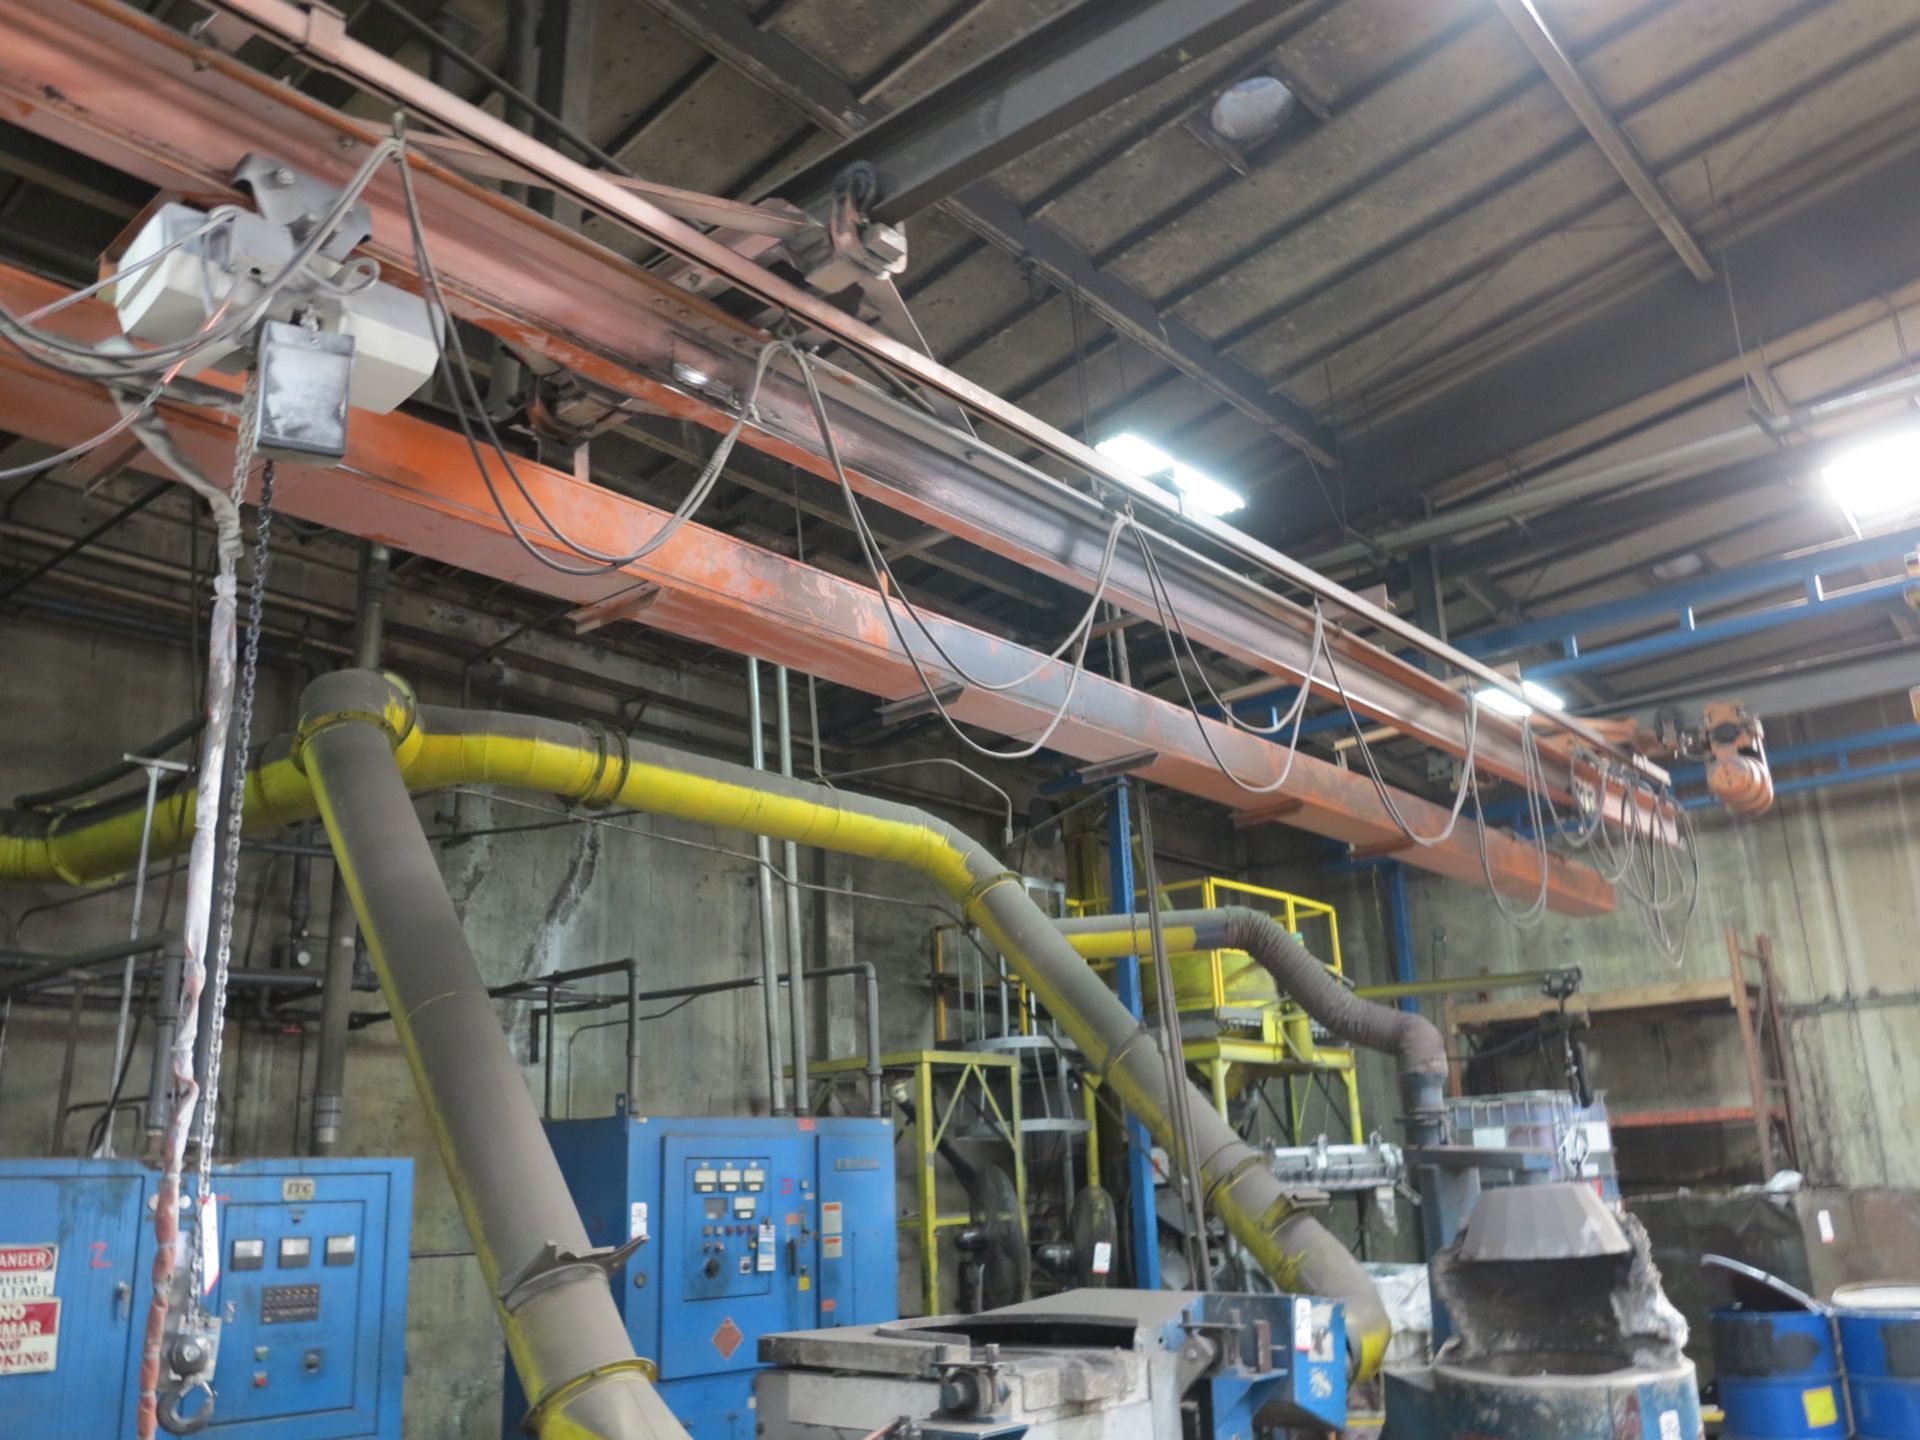 OVERHEAD CRANE SYSTEM W/ DUST COLLECTION/EXHAUST SYSTEM, APPROX. 120' SPAN, TRAVELS APPROX. 45' - Image 4 of 6